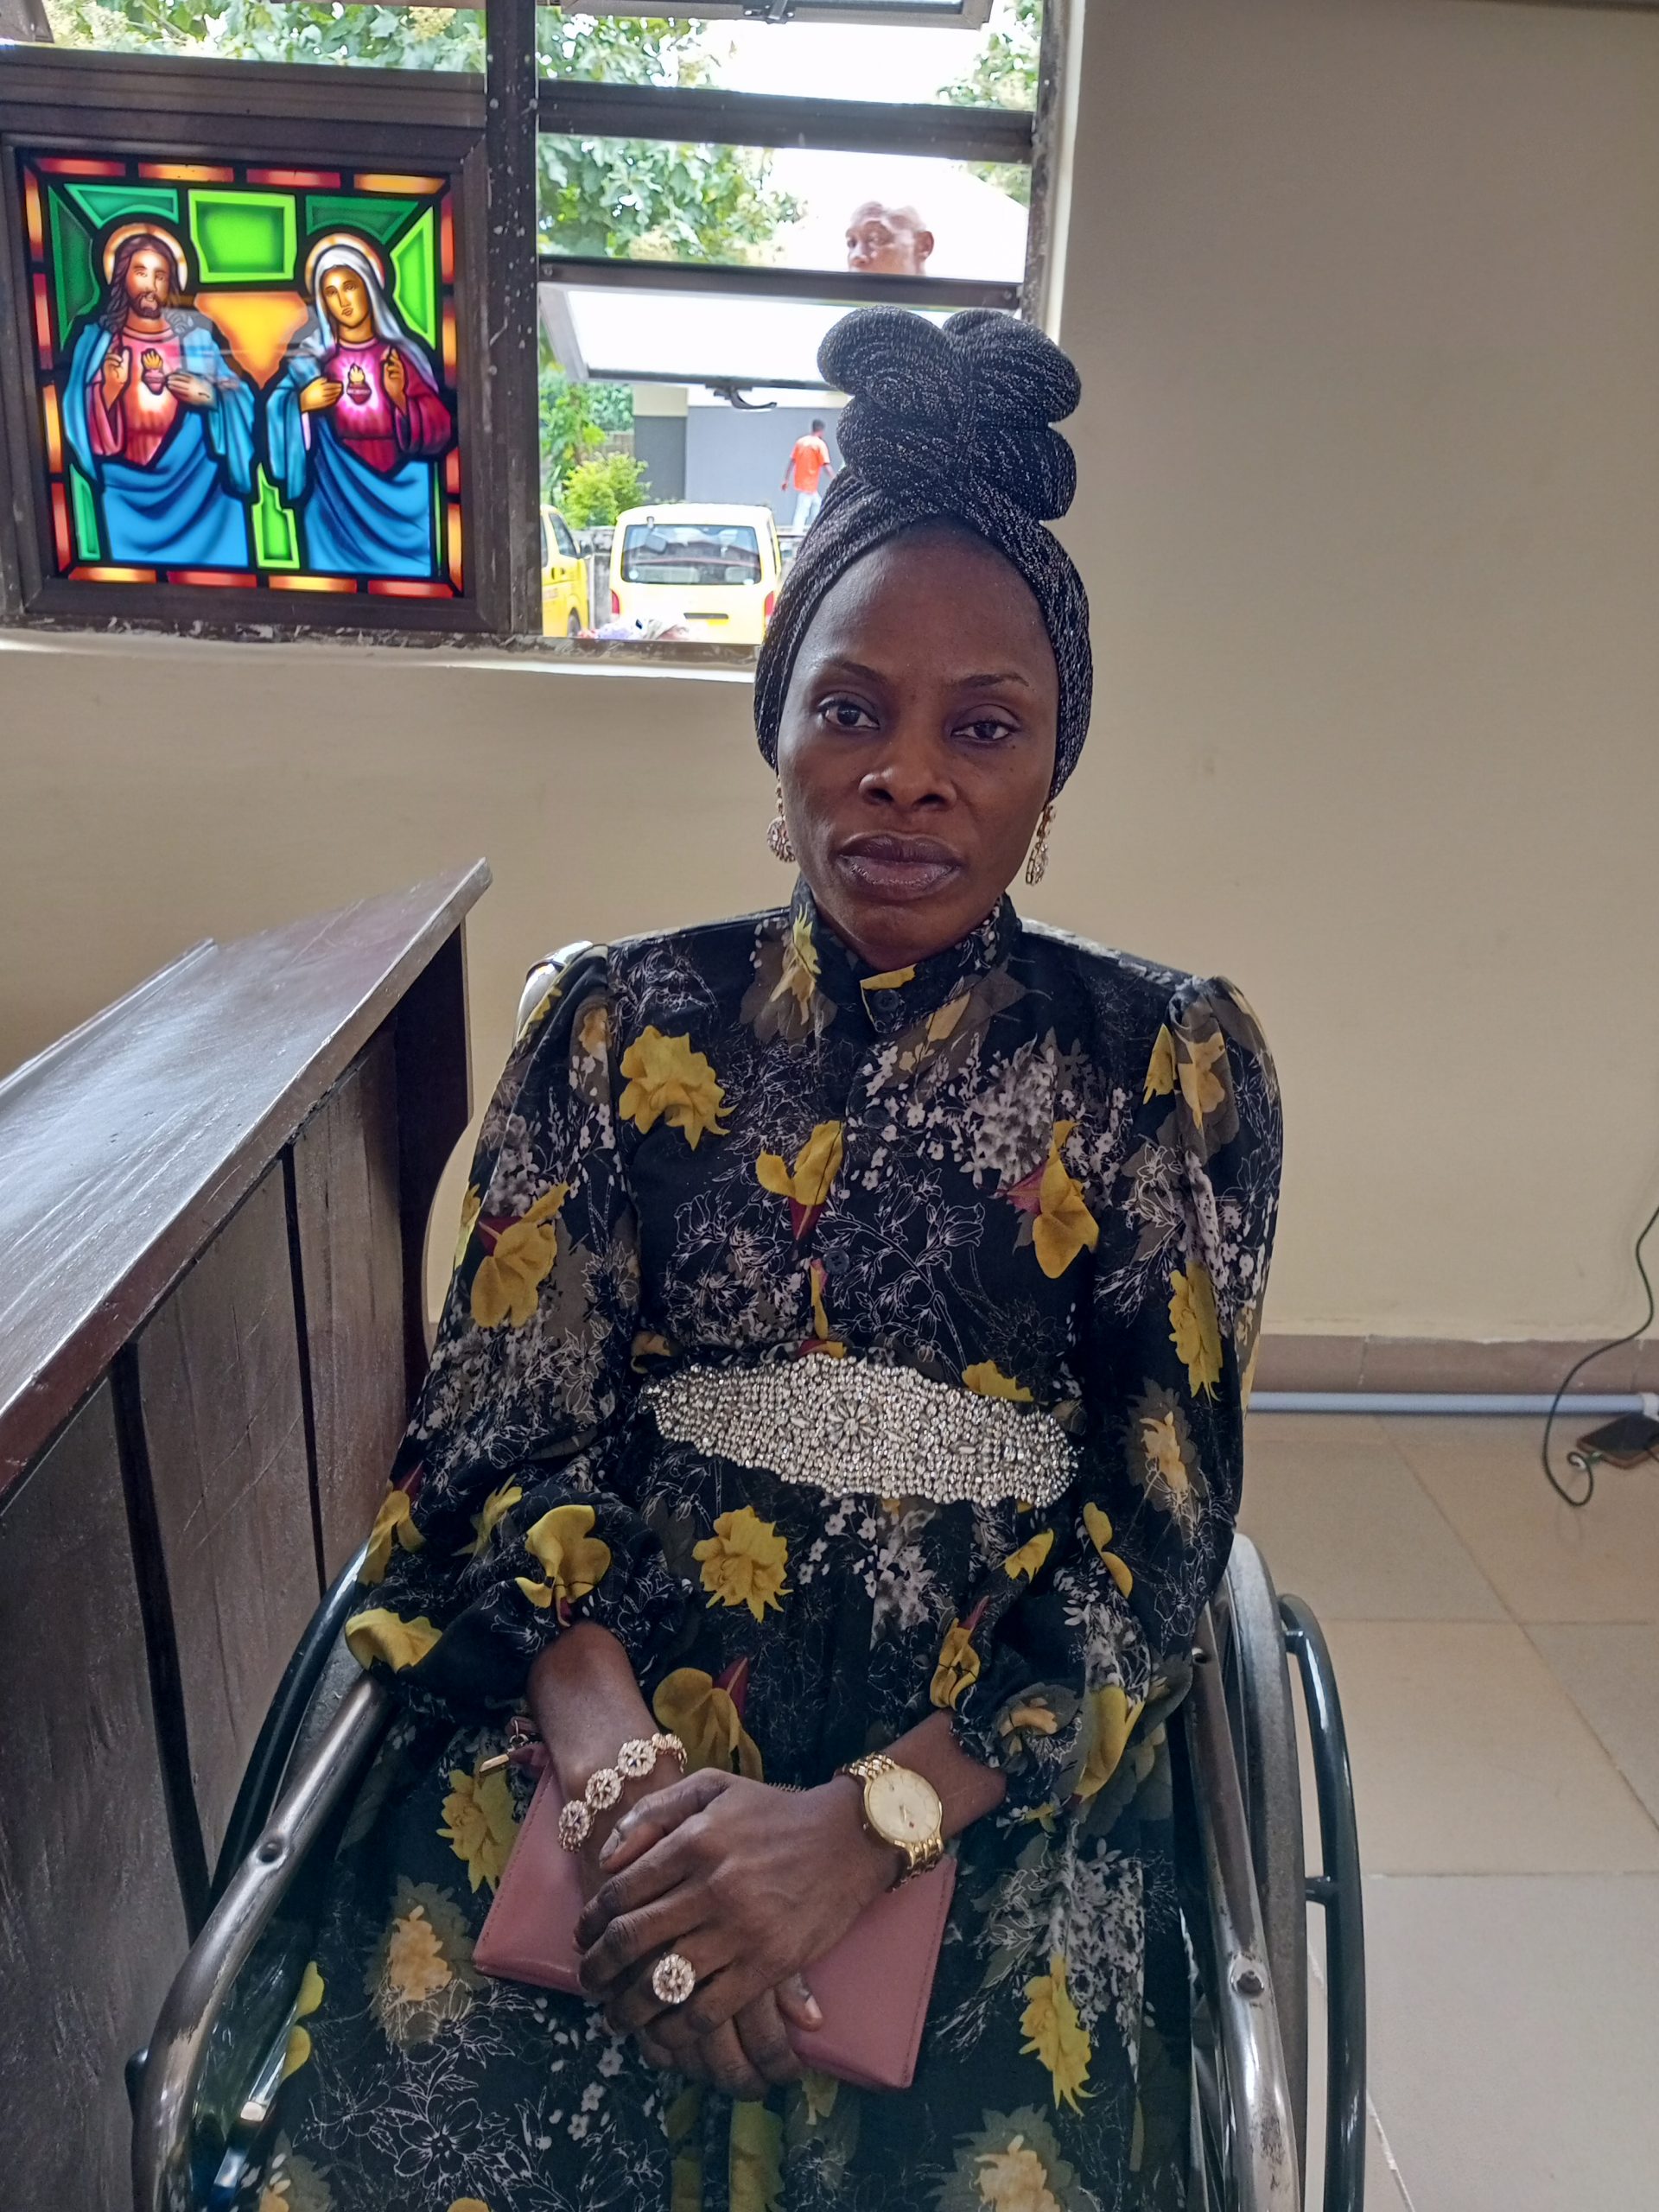 Owo Church Attack: ‘People with legs died, but in wheelchair, I miraculously escaped’ — Survivor recants